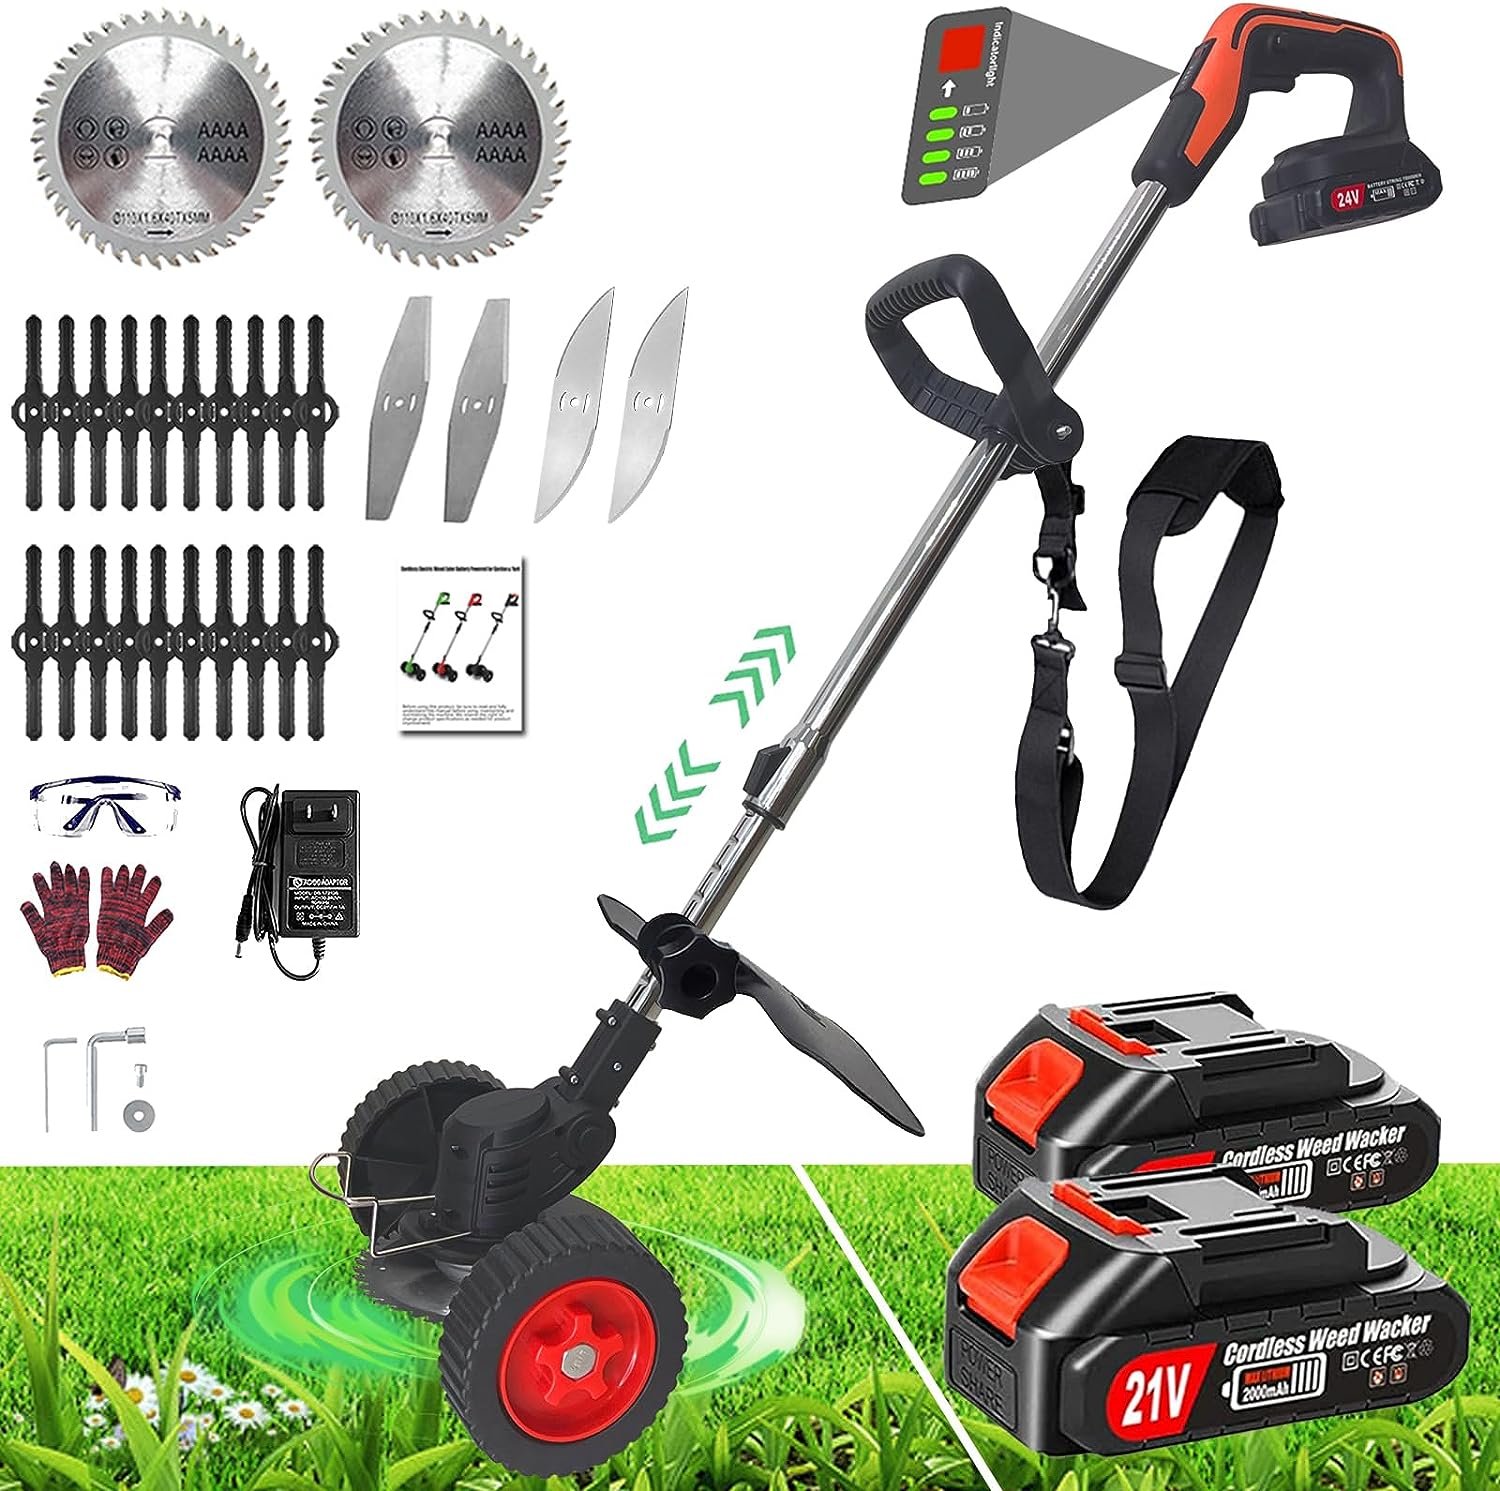 Weed Wacker Cordless Brush Cutter Review